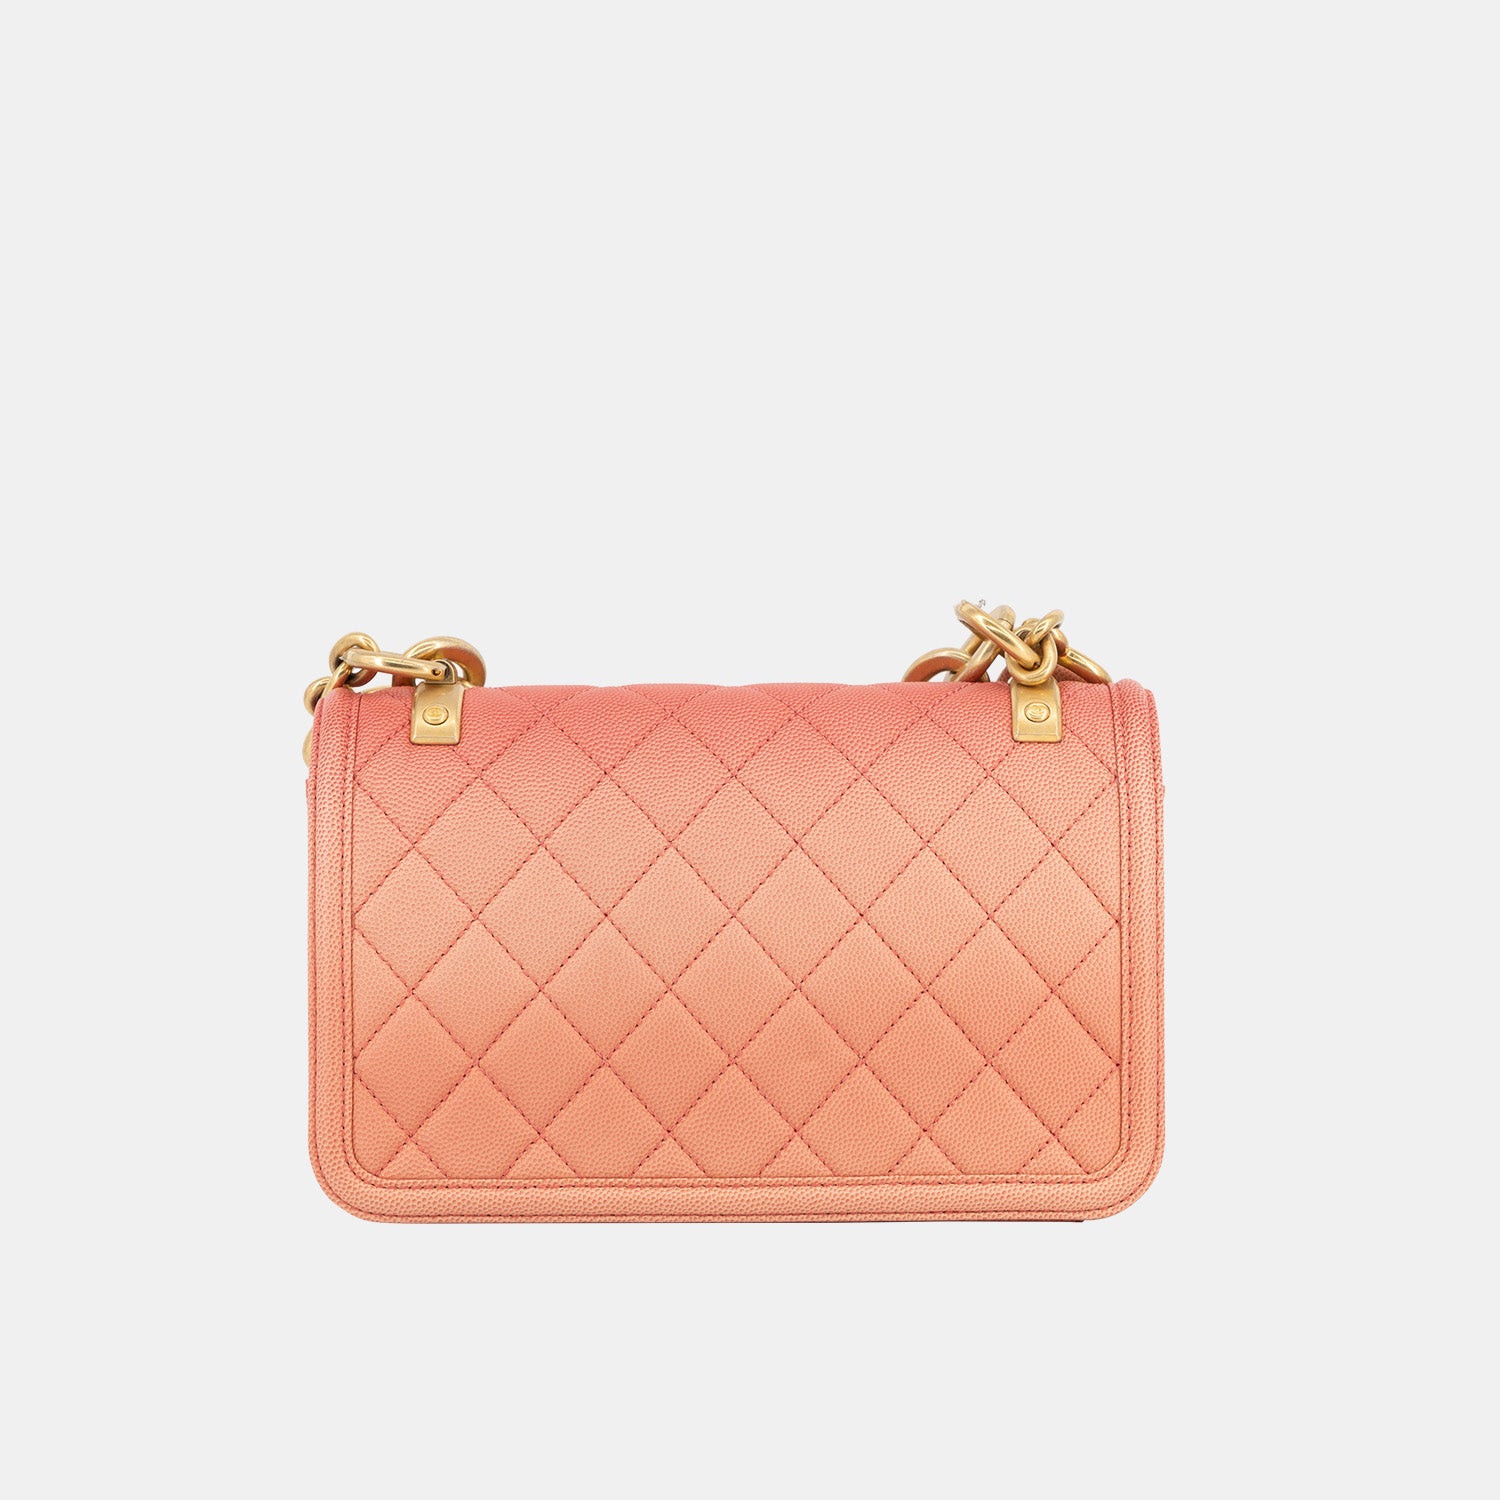 Chanel Sunset on The Sea Flap Bag in Coral Pink Caviar